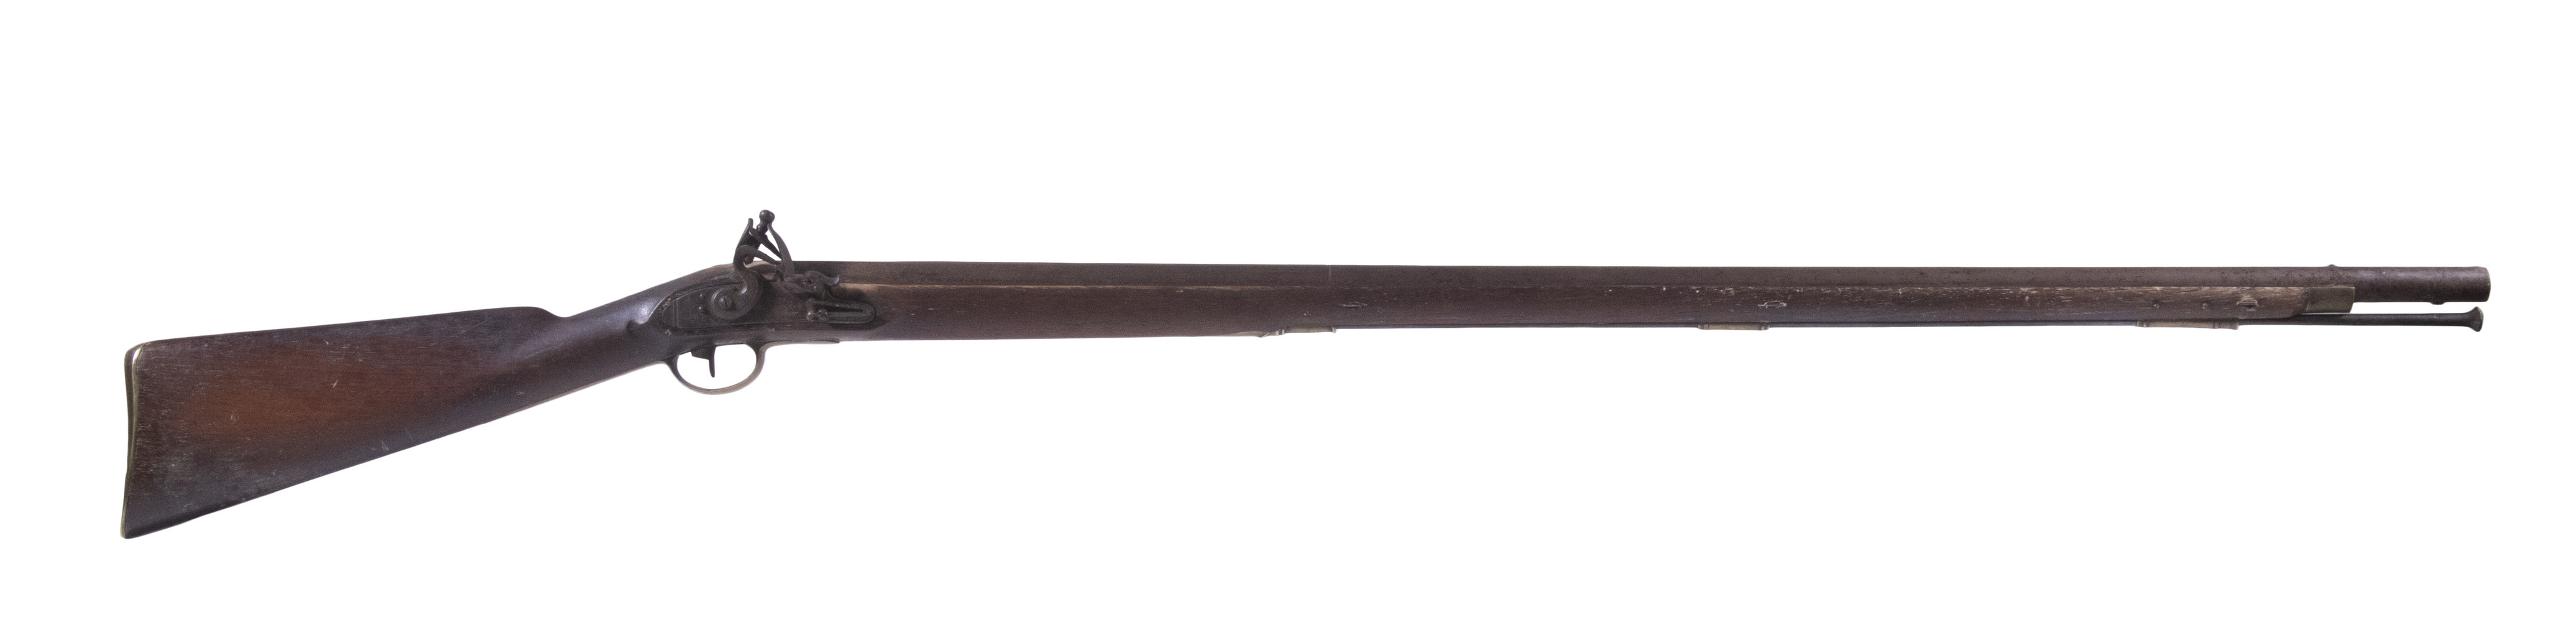 EARLY AMERICAN MILITARY MUSKET  3028e2